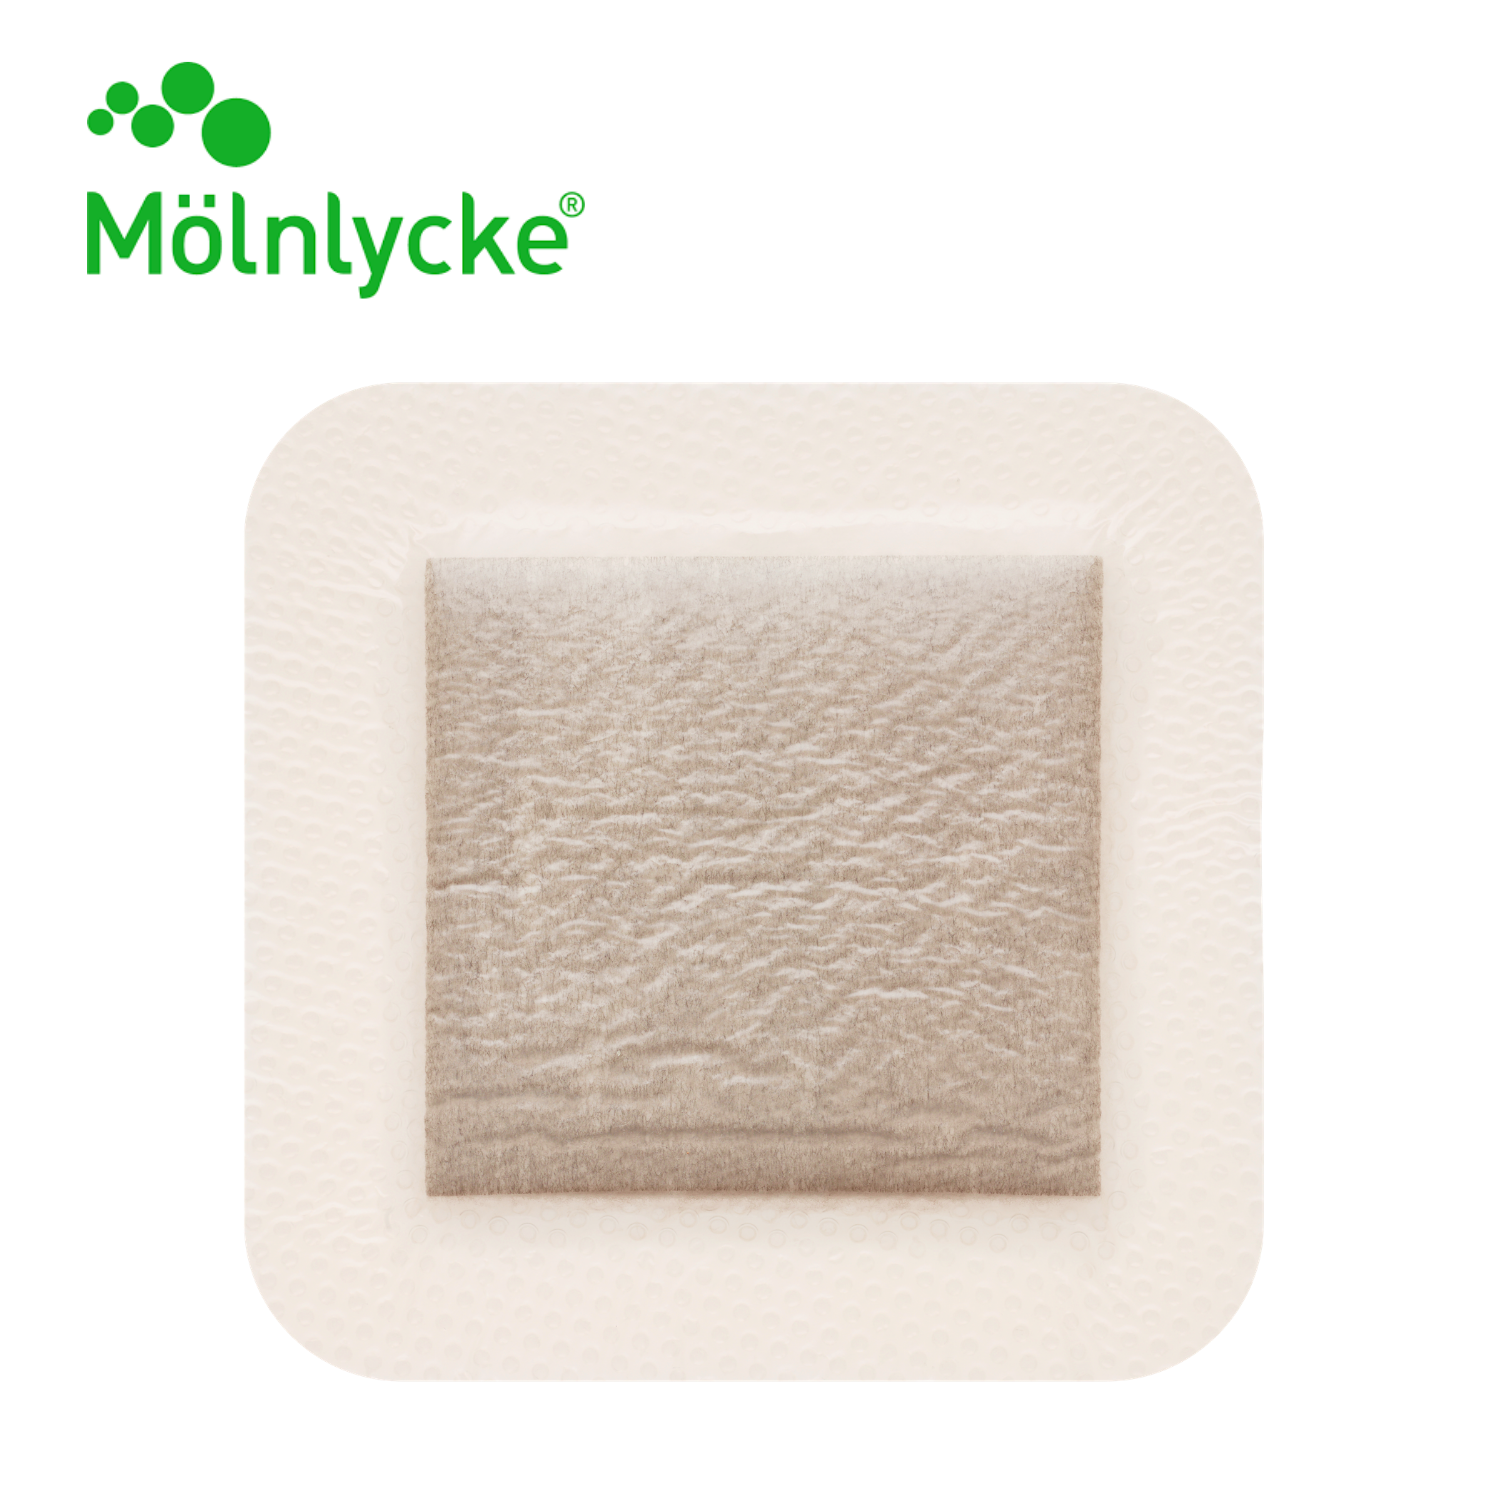 Molnlycke Products (20)